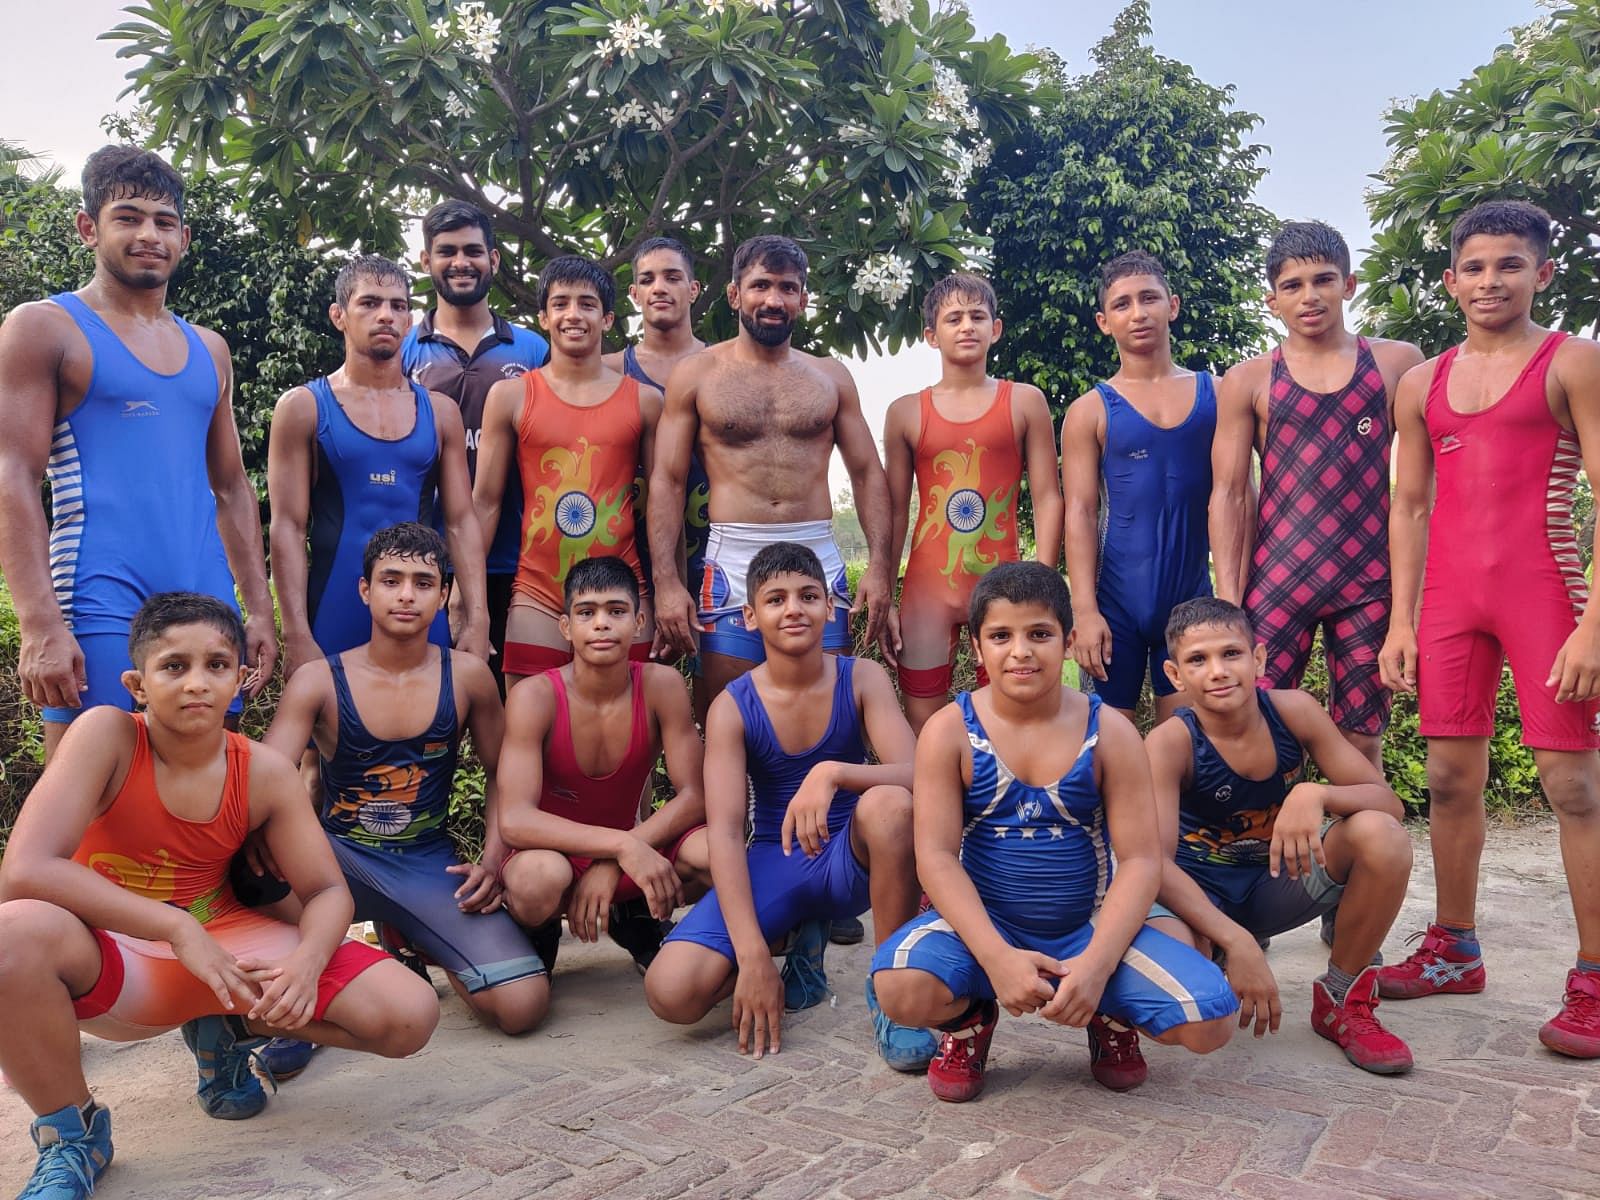 Olympic champion Yogeshwar Dutt with his students at his wrestling academy in Sonipat | Photo: Shubhangi Misra/ThePrint